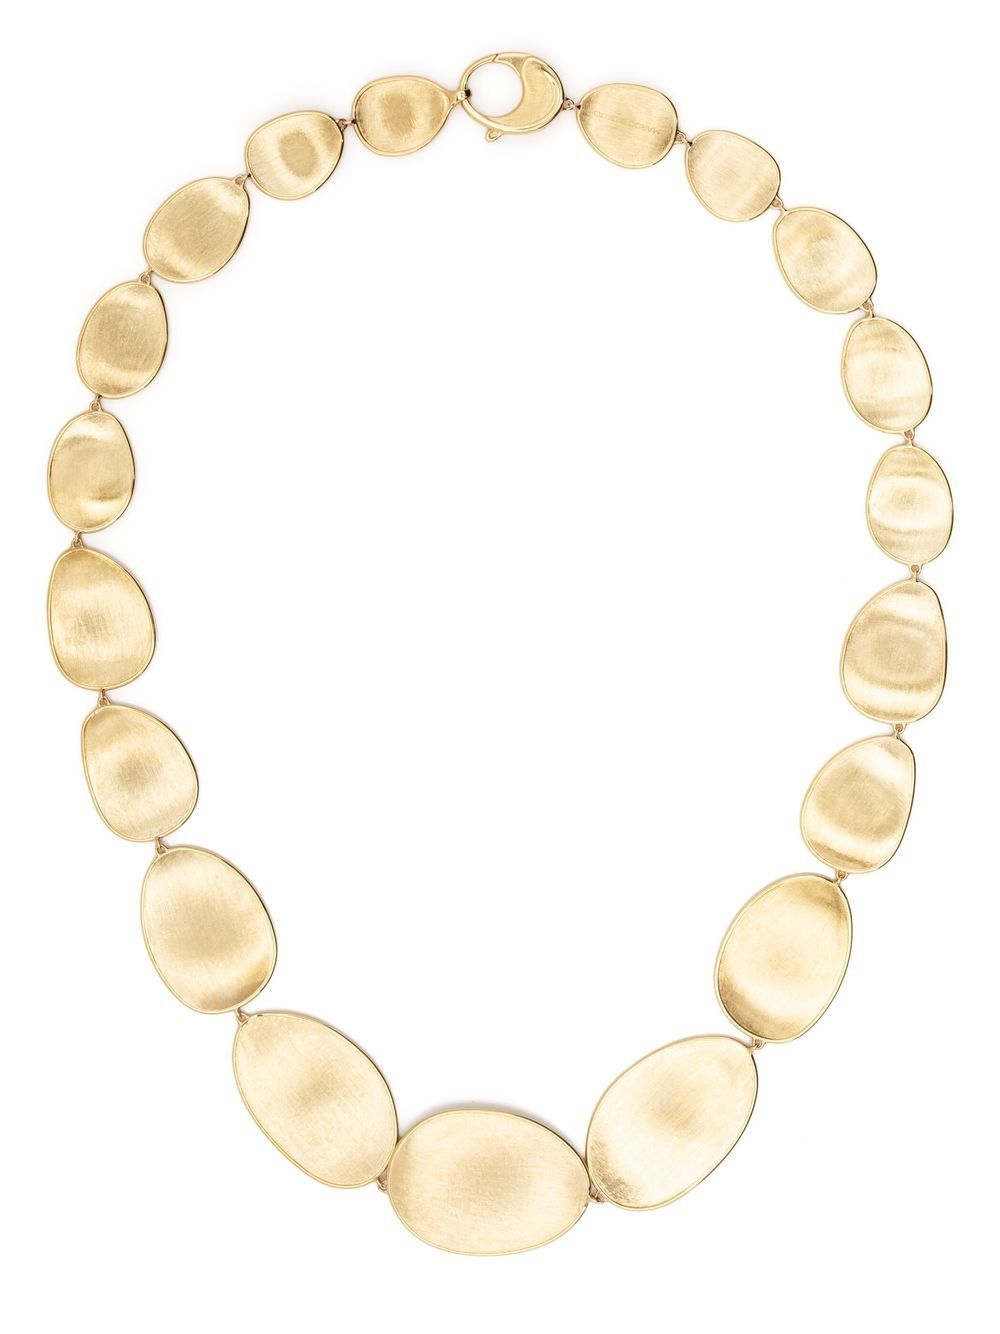 Marco Bicego 18kt Yellow Gold Lunaria Necklace